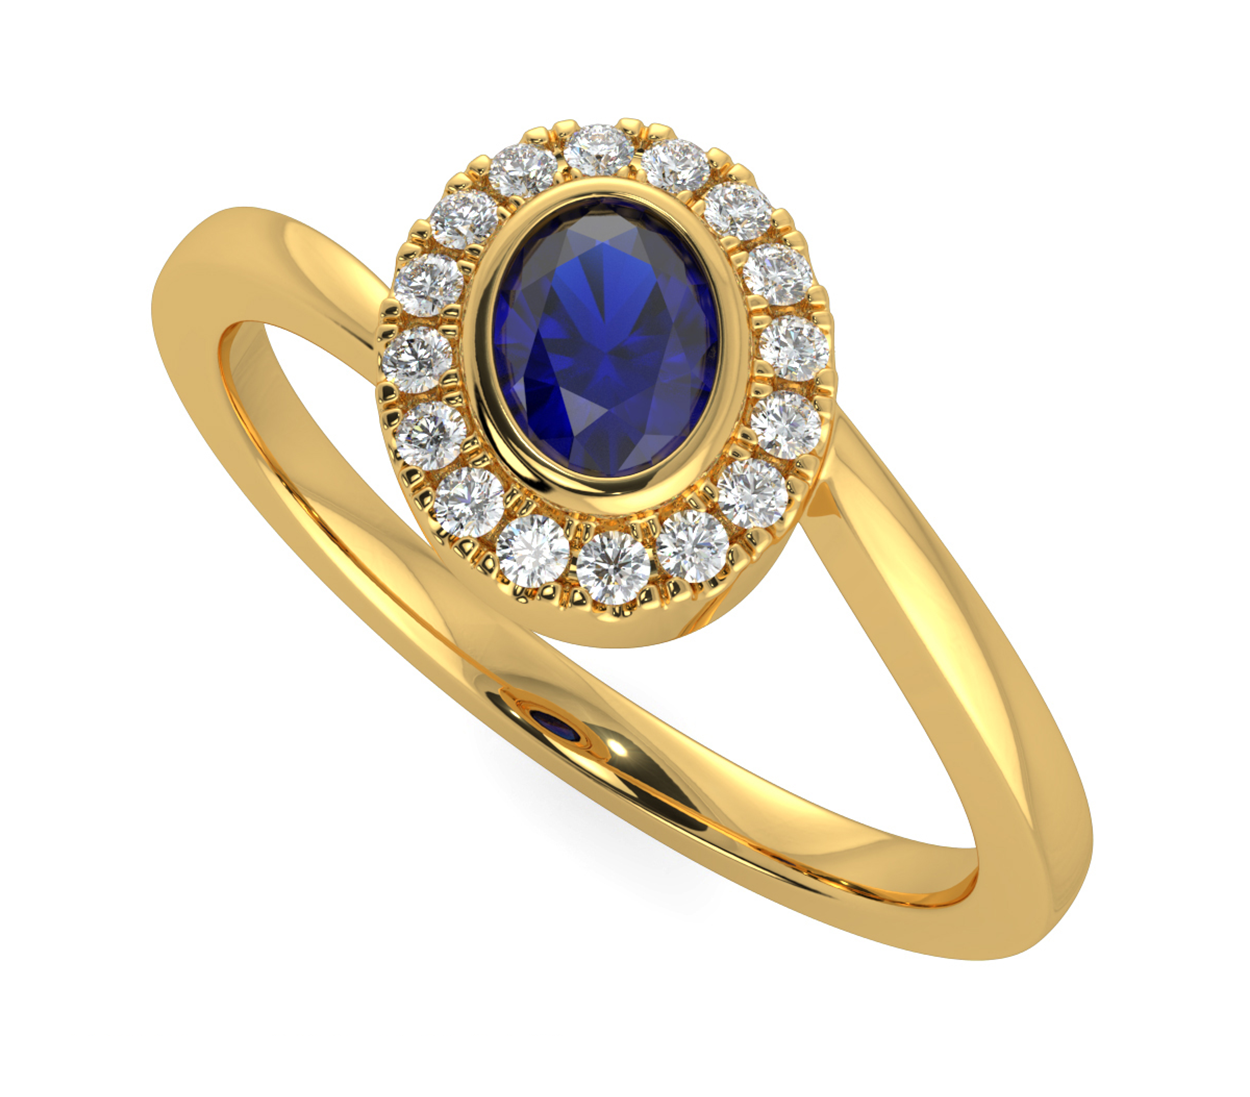 Majestic 22K Gold 7.5CT Blue Sapphire Ring | Blue sapphire, Blue sapphire  rings, Sapphire stone